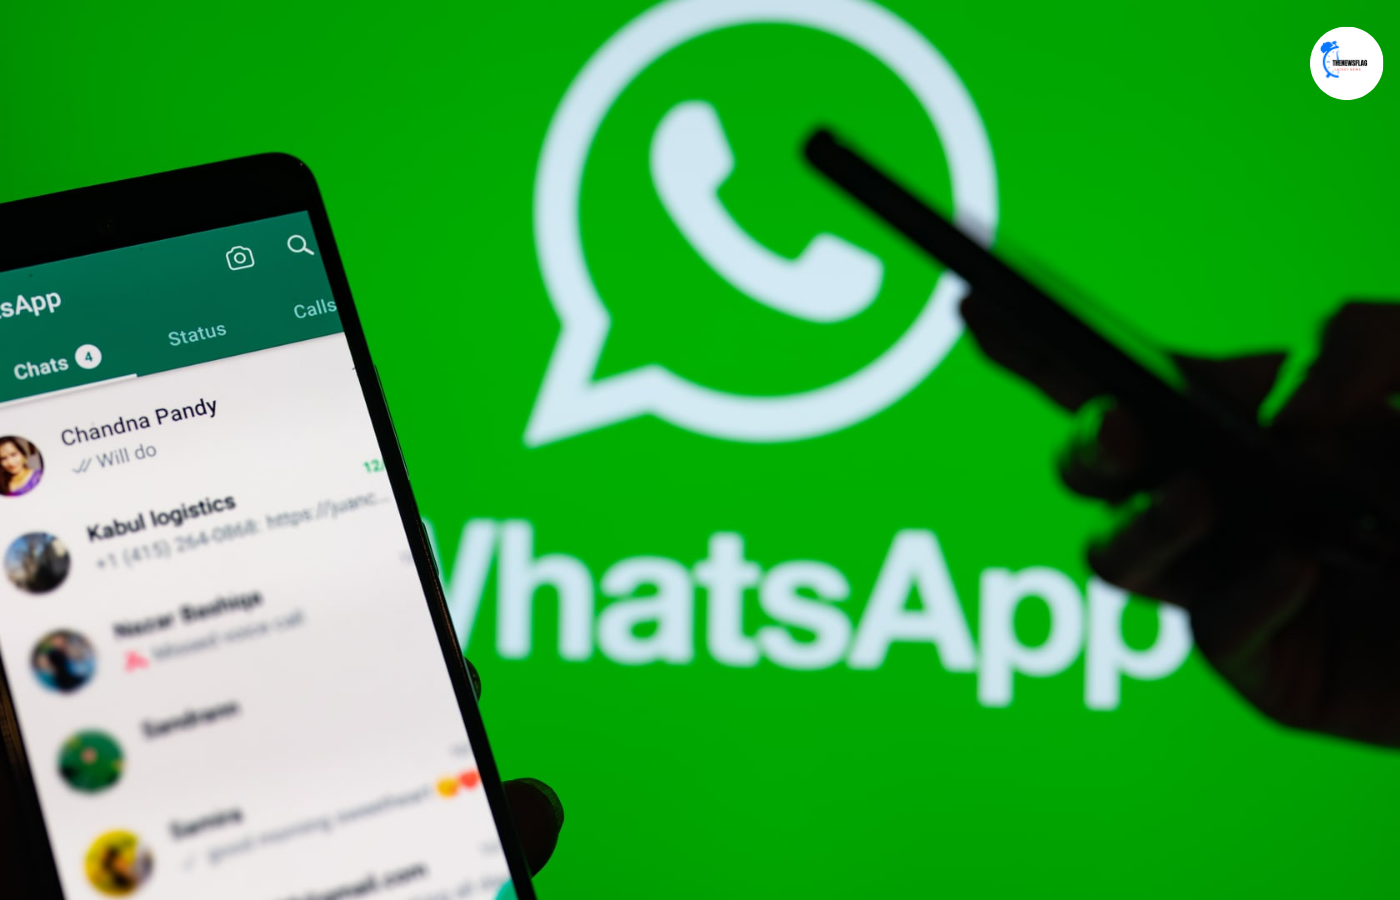 WhatsApp rolls out a new feature to detect end-to-end encrypted conversations